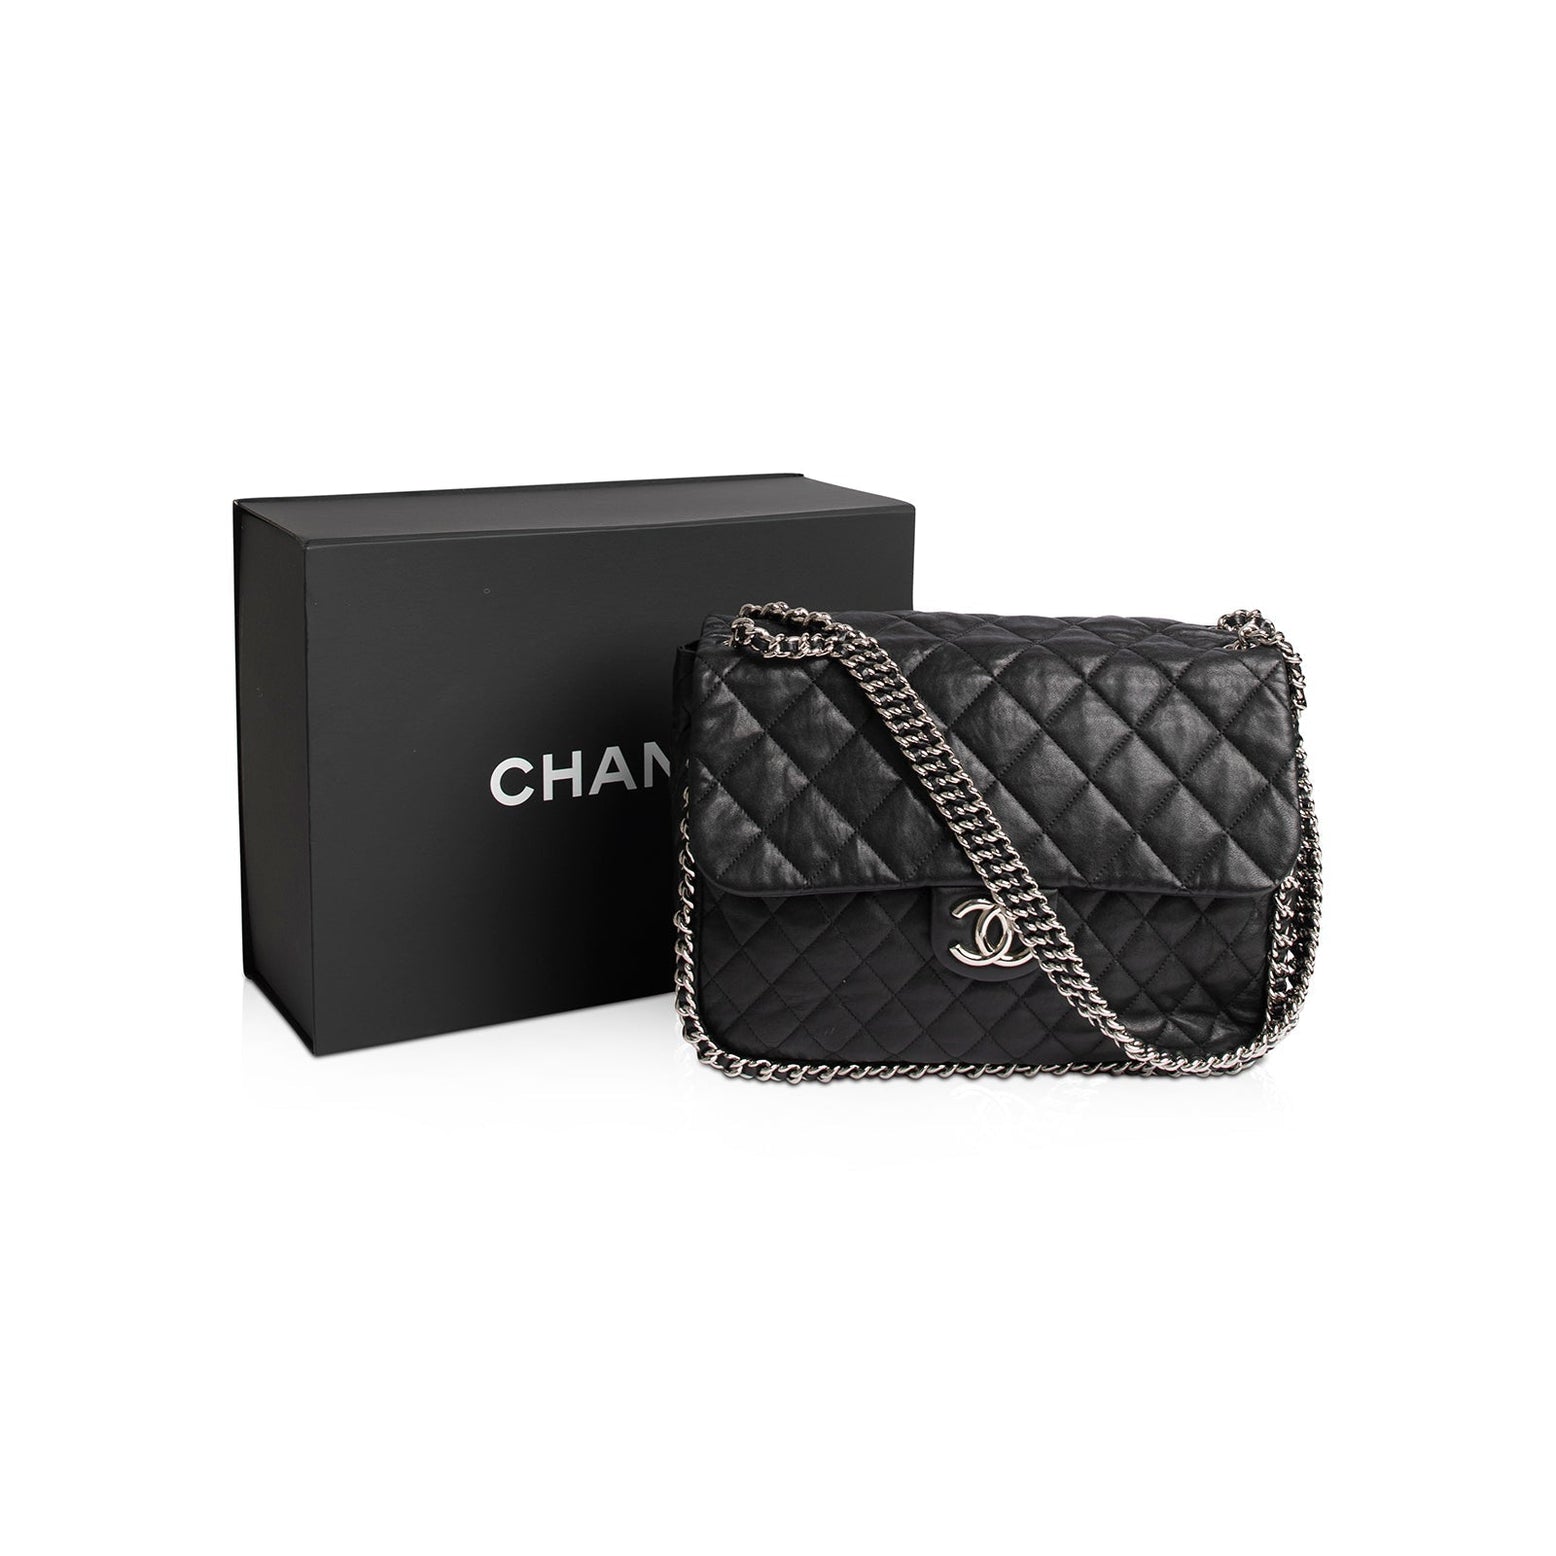 Chanel Resale Value  How to Maximize Profits  Academy by FASHIONPHILE